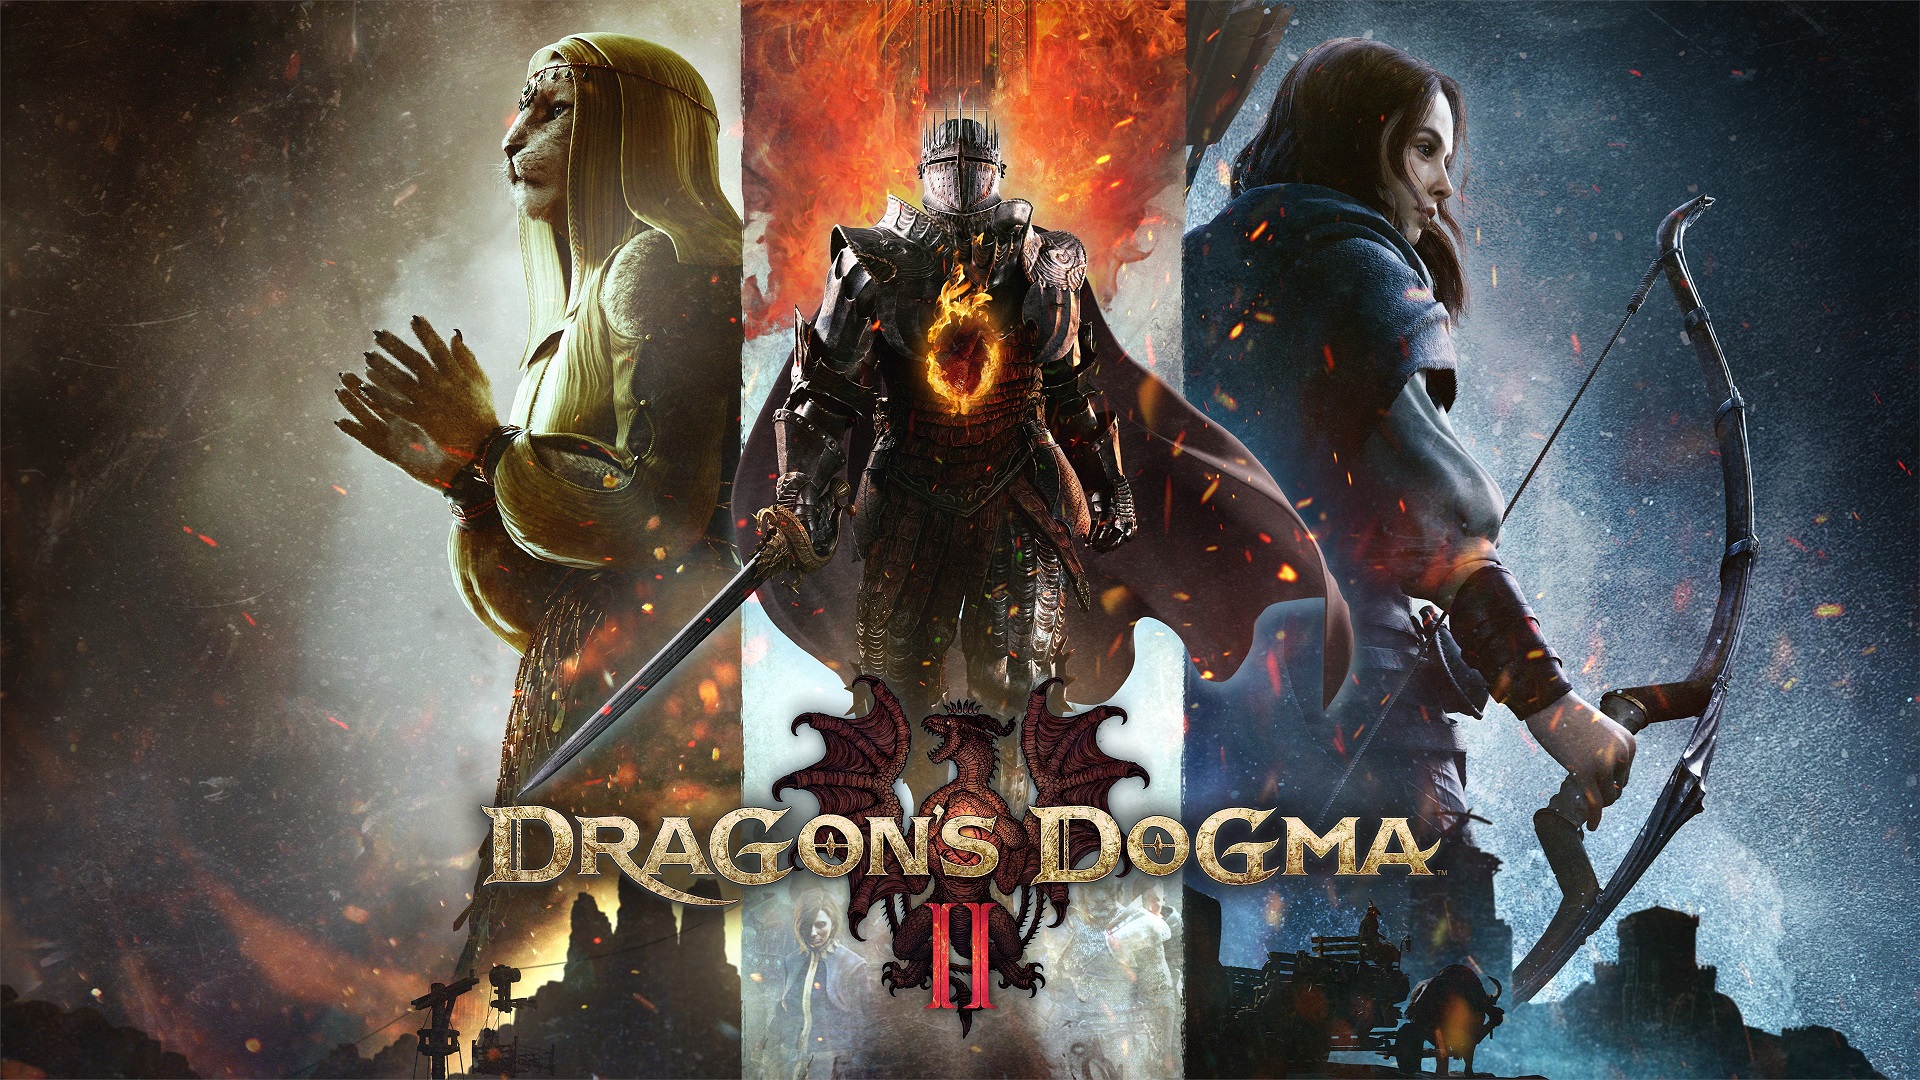 Dragons Dogma 2 fully revealed, first details